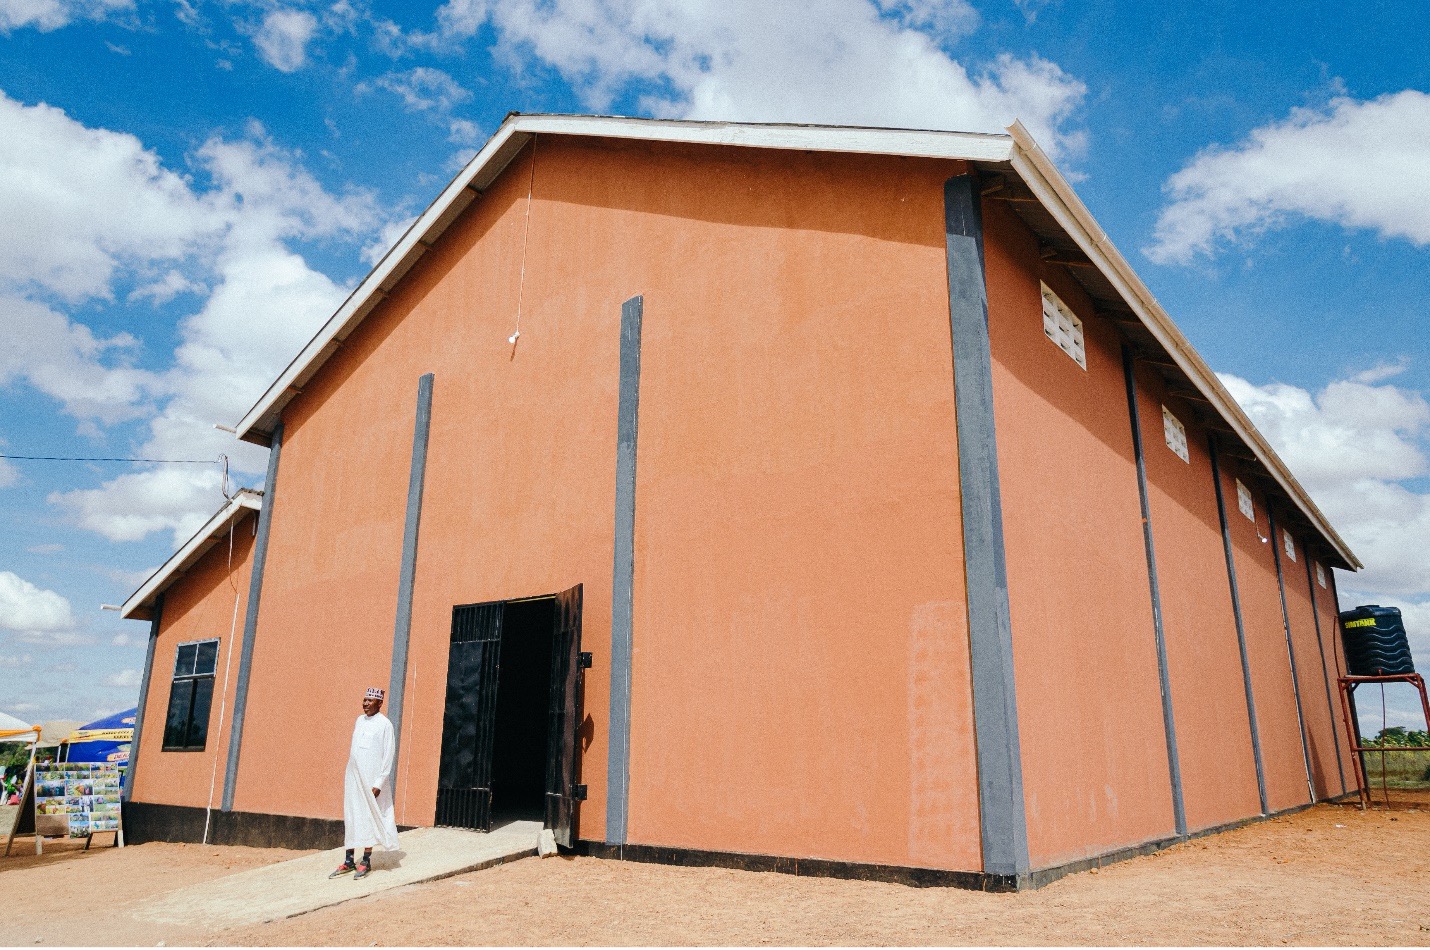 The warehouse constructed in Ikungi, Singida through support of the UN Women and UNFPA Joint Programme to improve the storage of crops for stronger post-harvest sales. Photo: UN Women